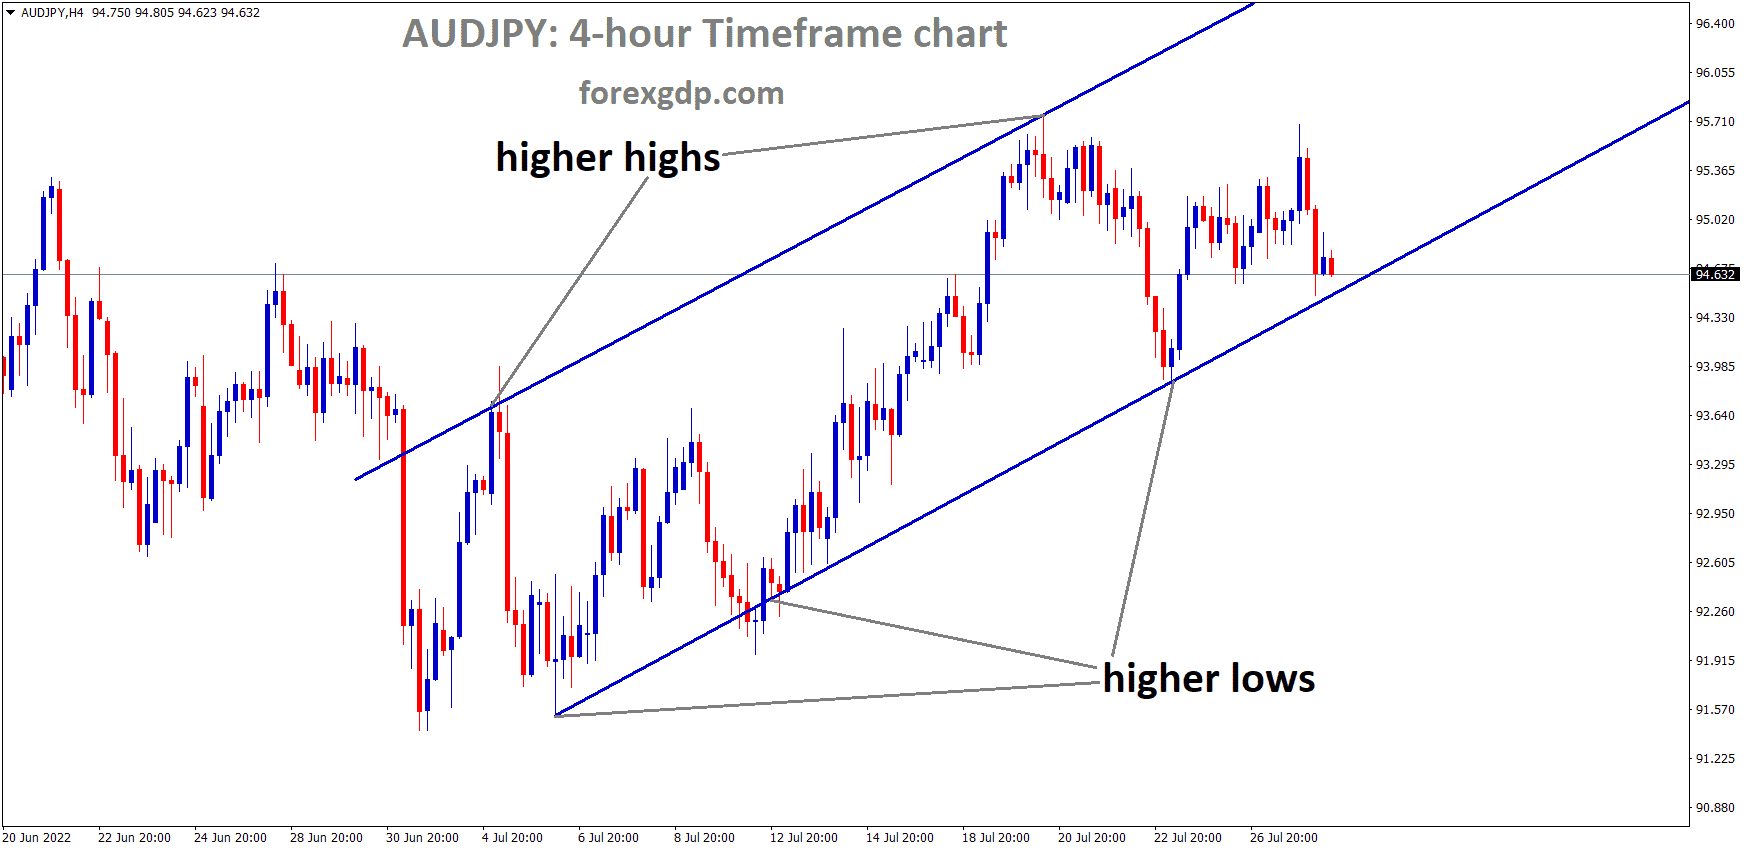 AUDJPY is moving in an Ascending channel and the Market has reached the higher low area of the channel